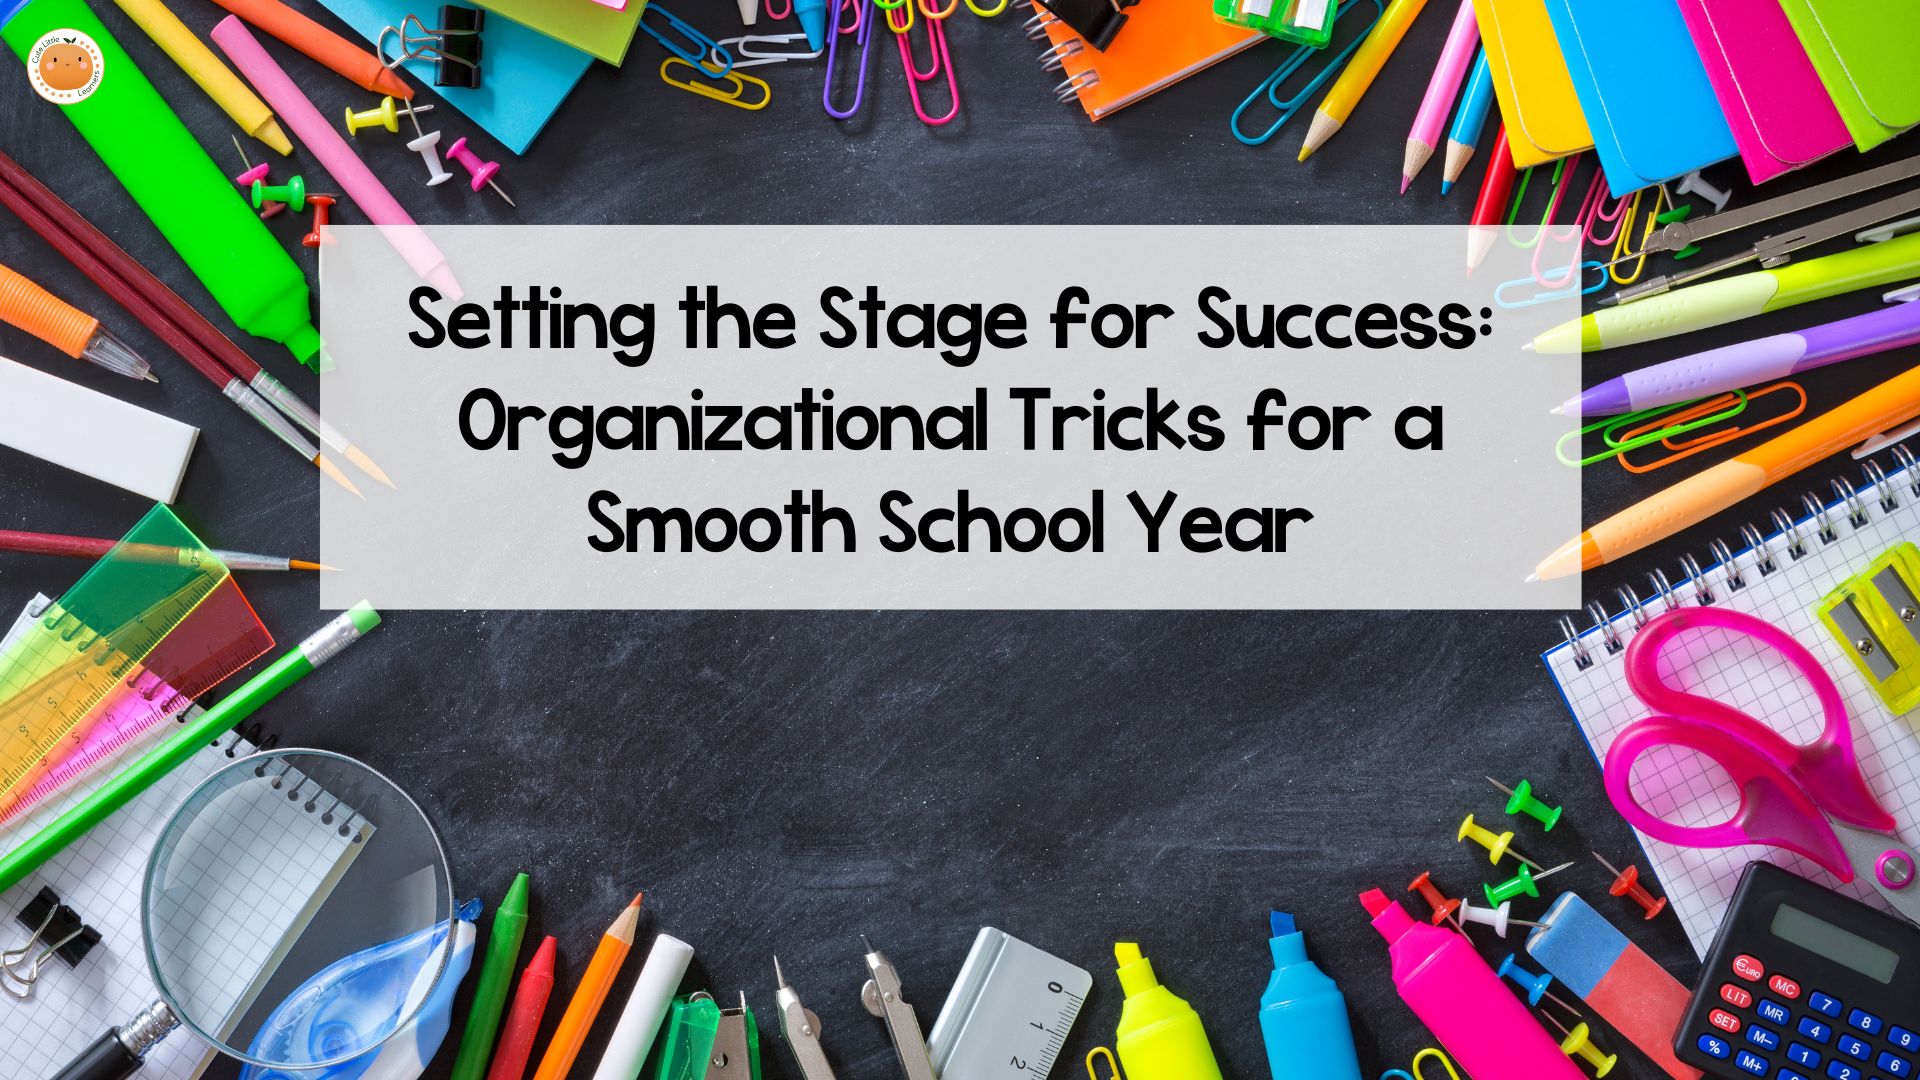 Setting the Stage for Success: Organizational Tricks for a Smooth School Year